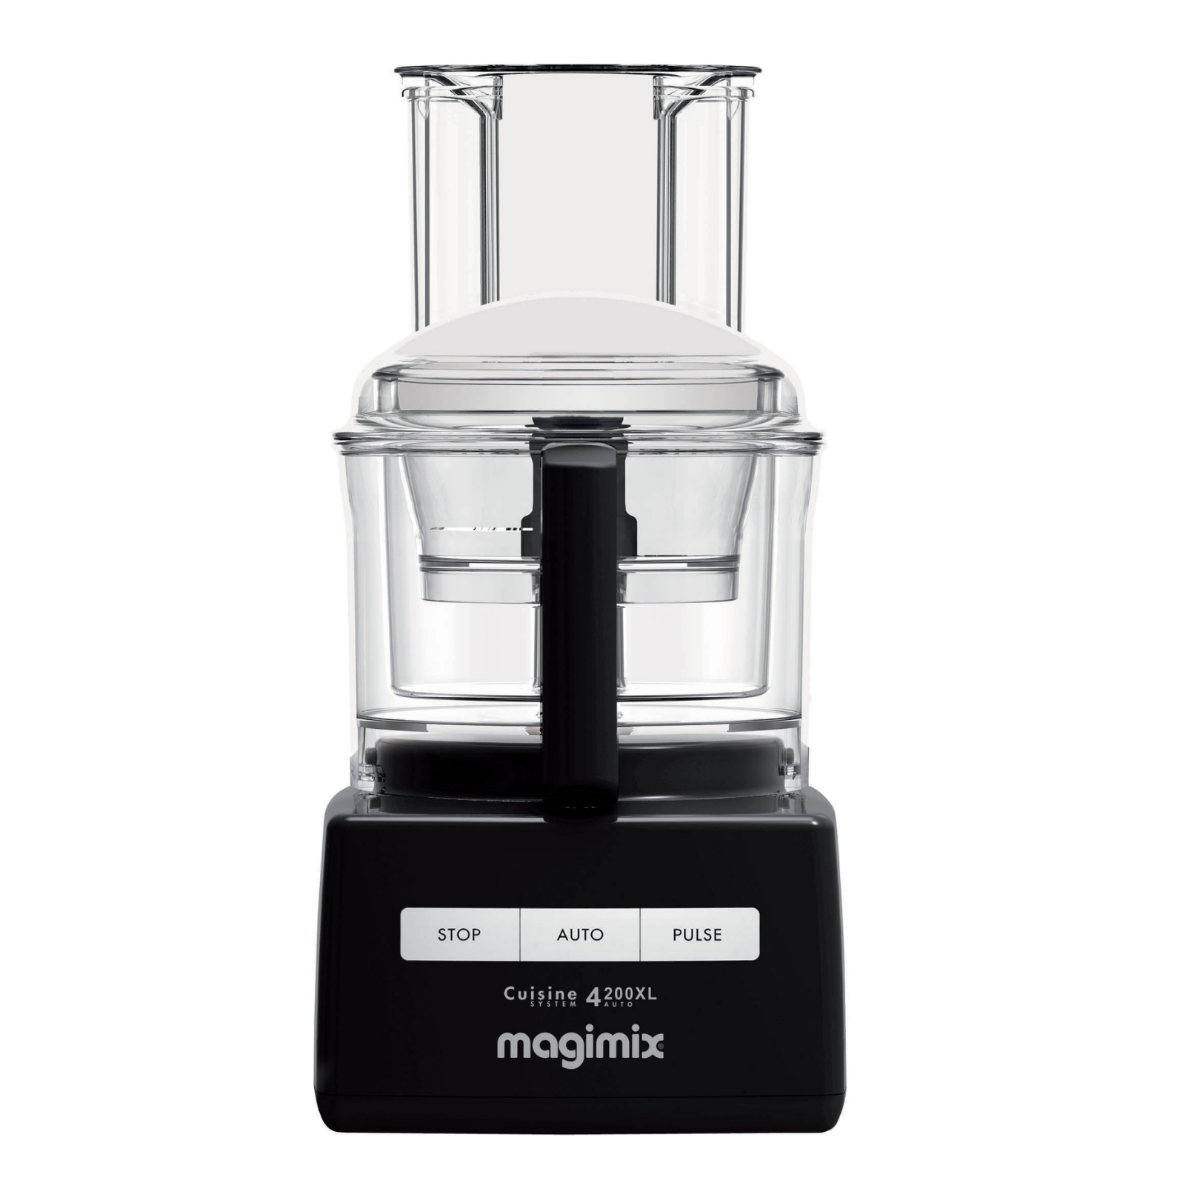 smaak Herdenkings Catastrofaal Food Processor 4200 XL - Black | Magimix® | Everything Kitchens